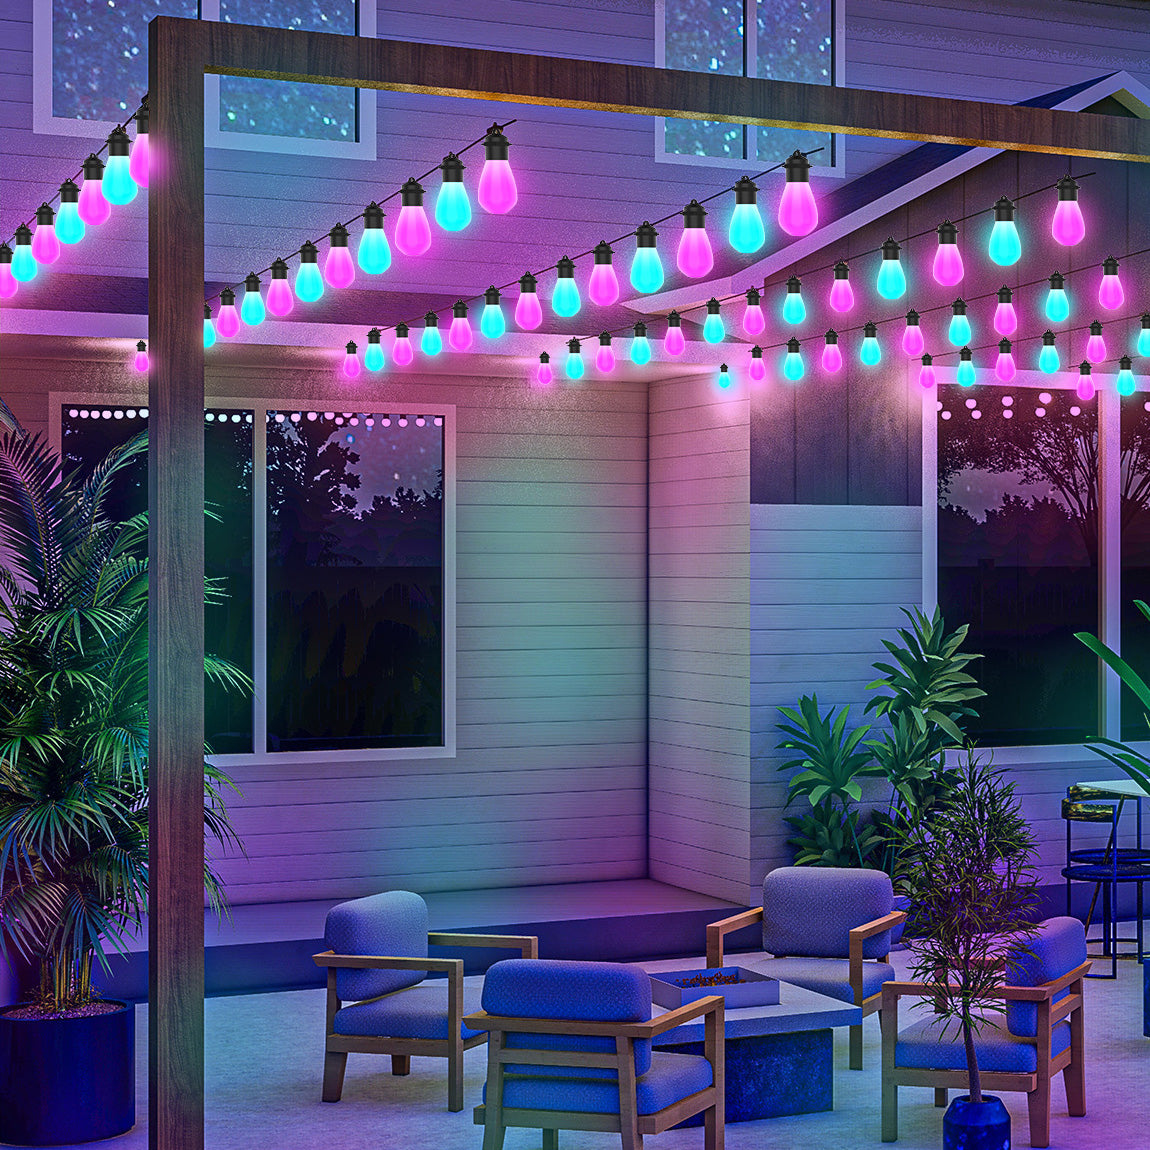 39.4FT LED Strip Lights Rope Light Blub Bluetooth Wifi APP Remote Control Timing Camping Charms Projector Lights NINETY NIGHT   